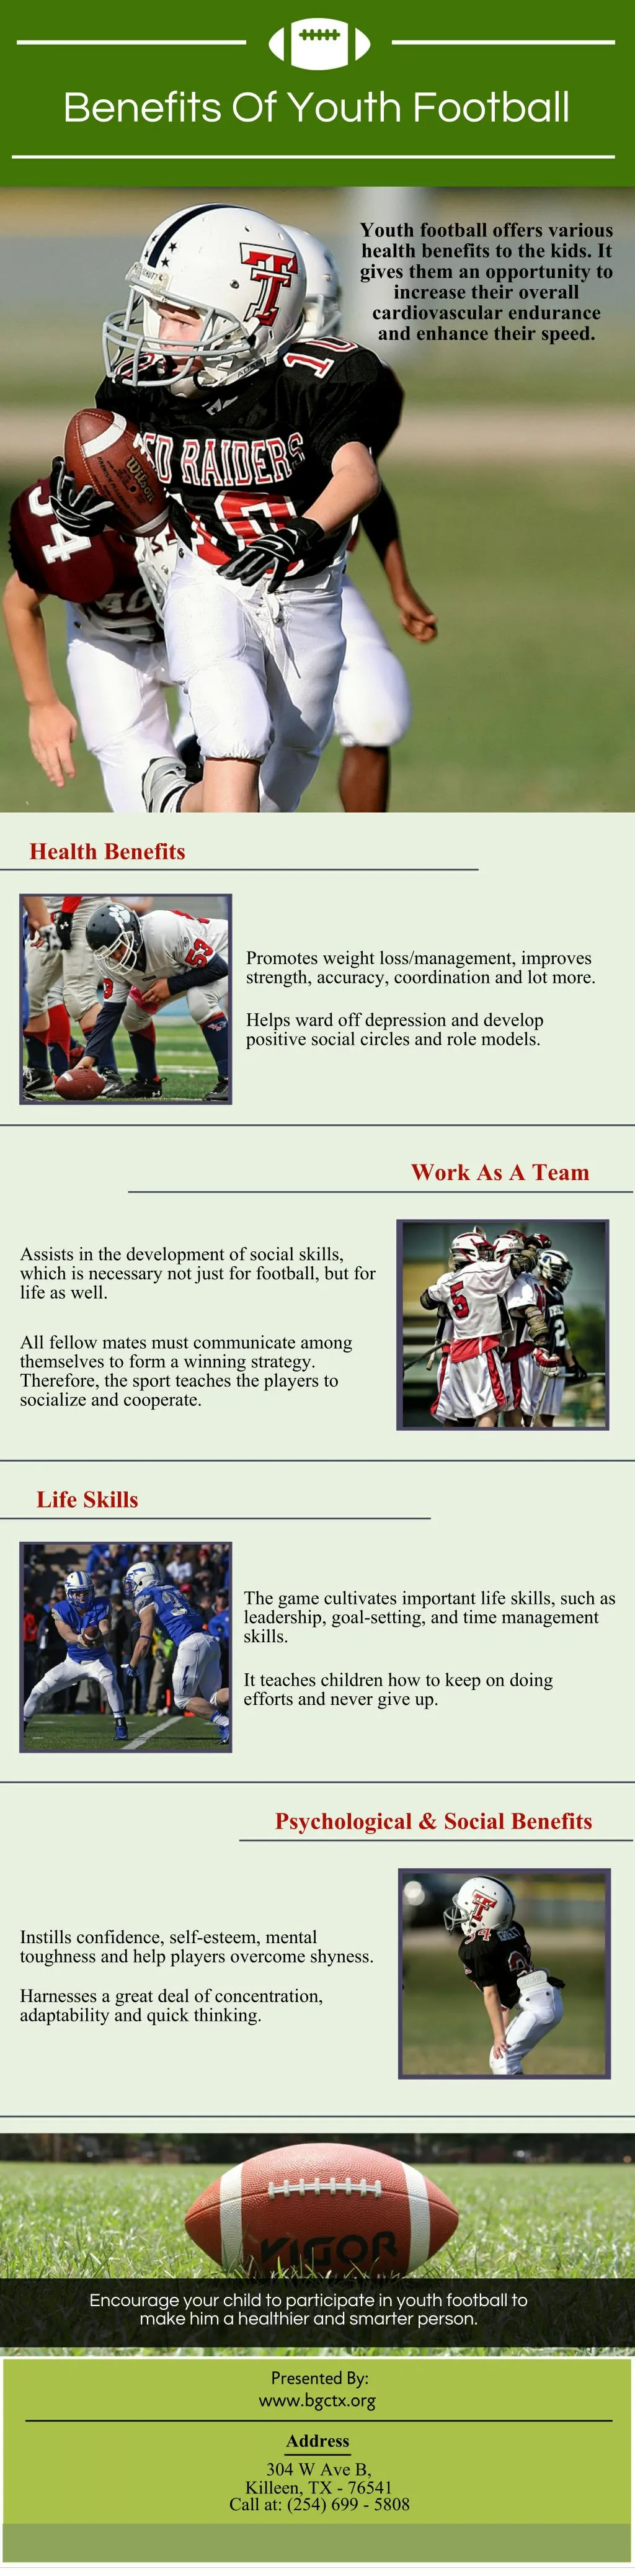 benefits of youth football